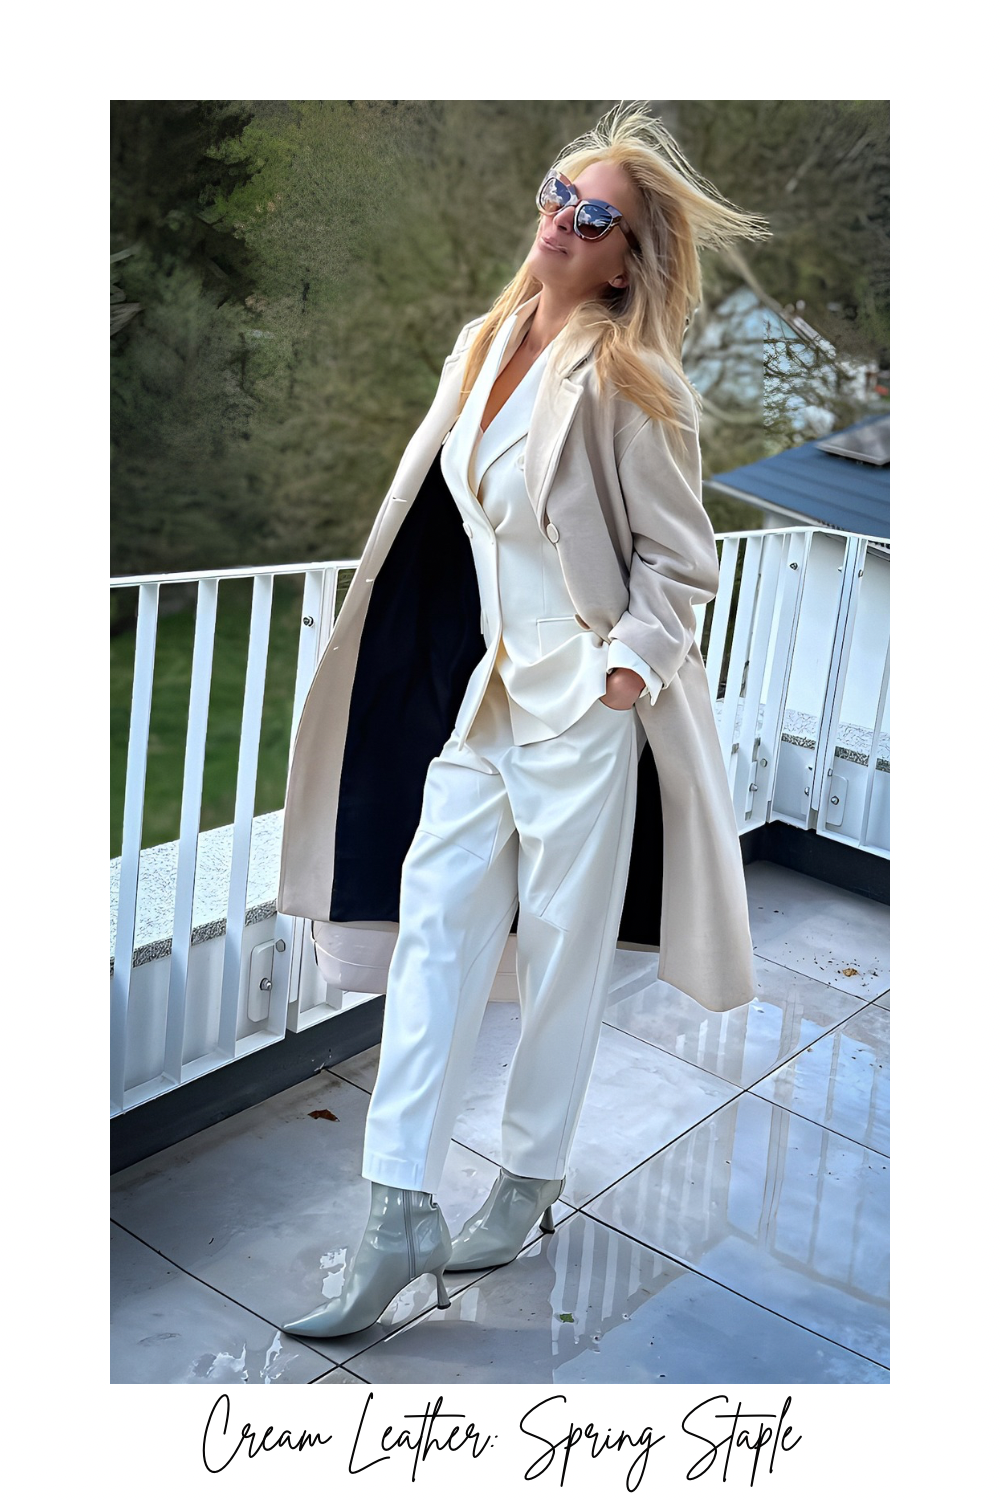 How to Style Cream Leather Pants: Tips for Women Over 50